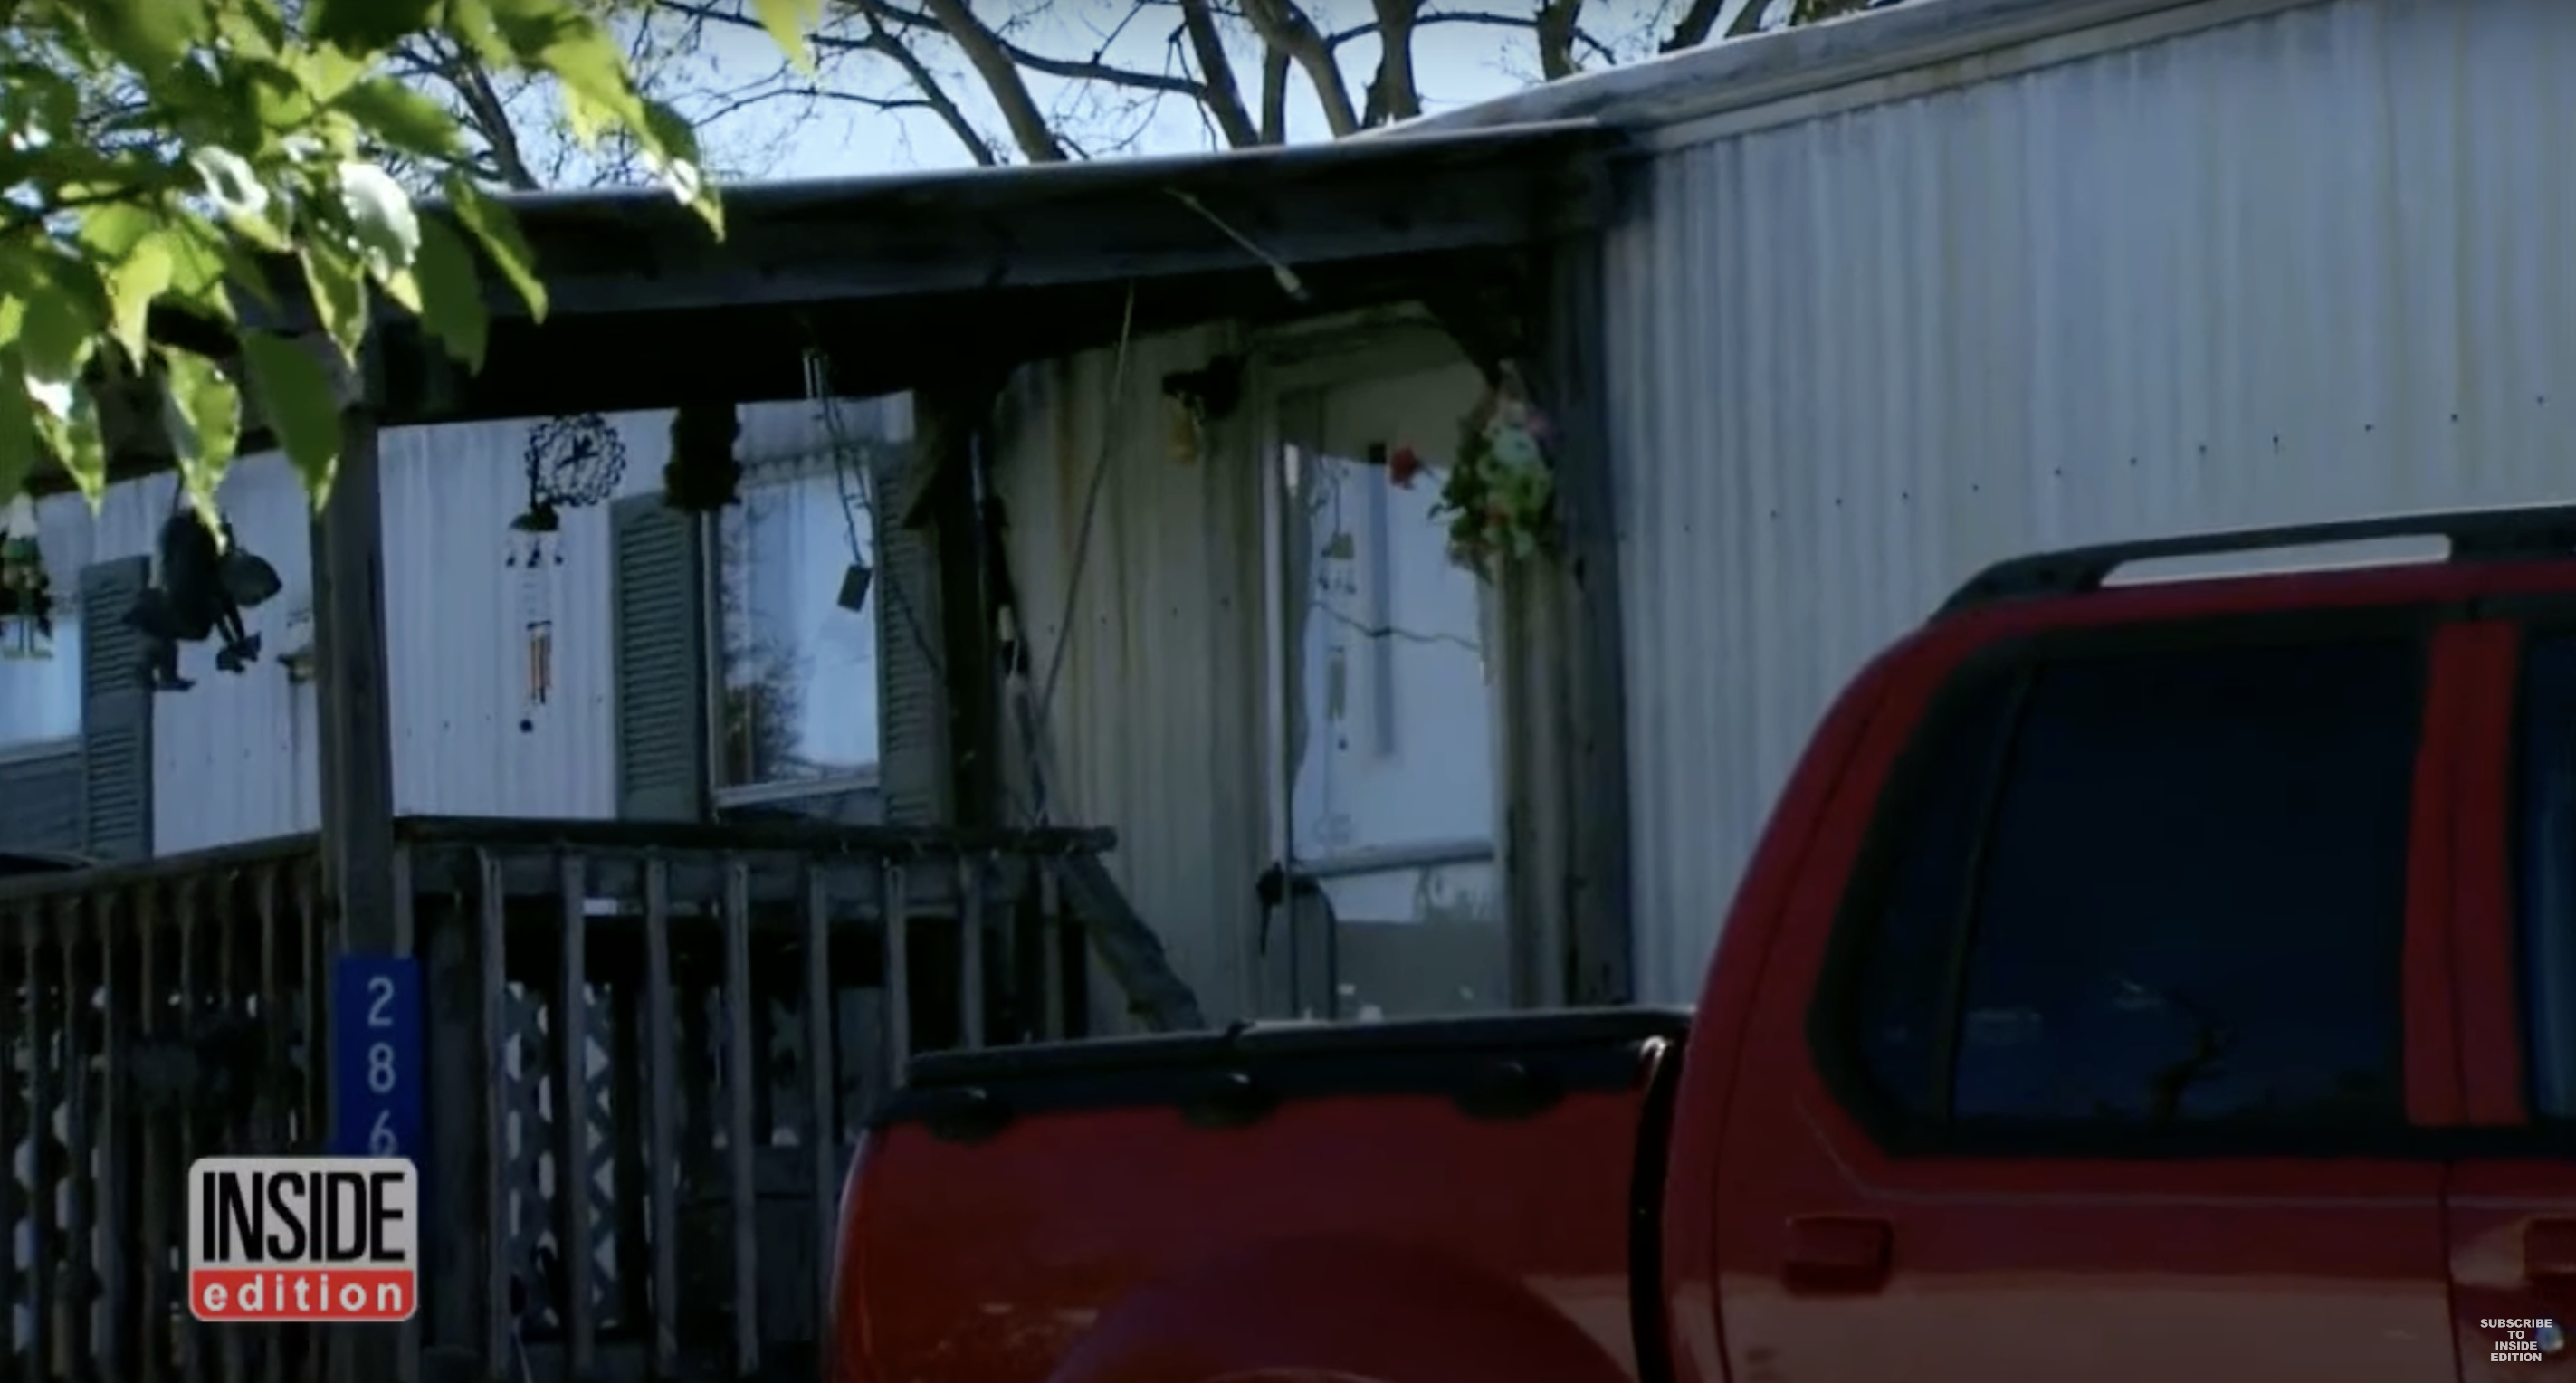 A closer view of the Southern Indiana trailer where Erin Moran spent her last few months | Source: Youtube.com/Inside Edition